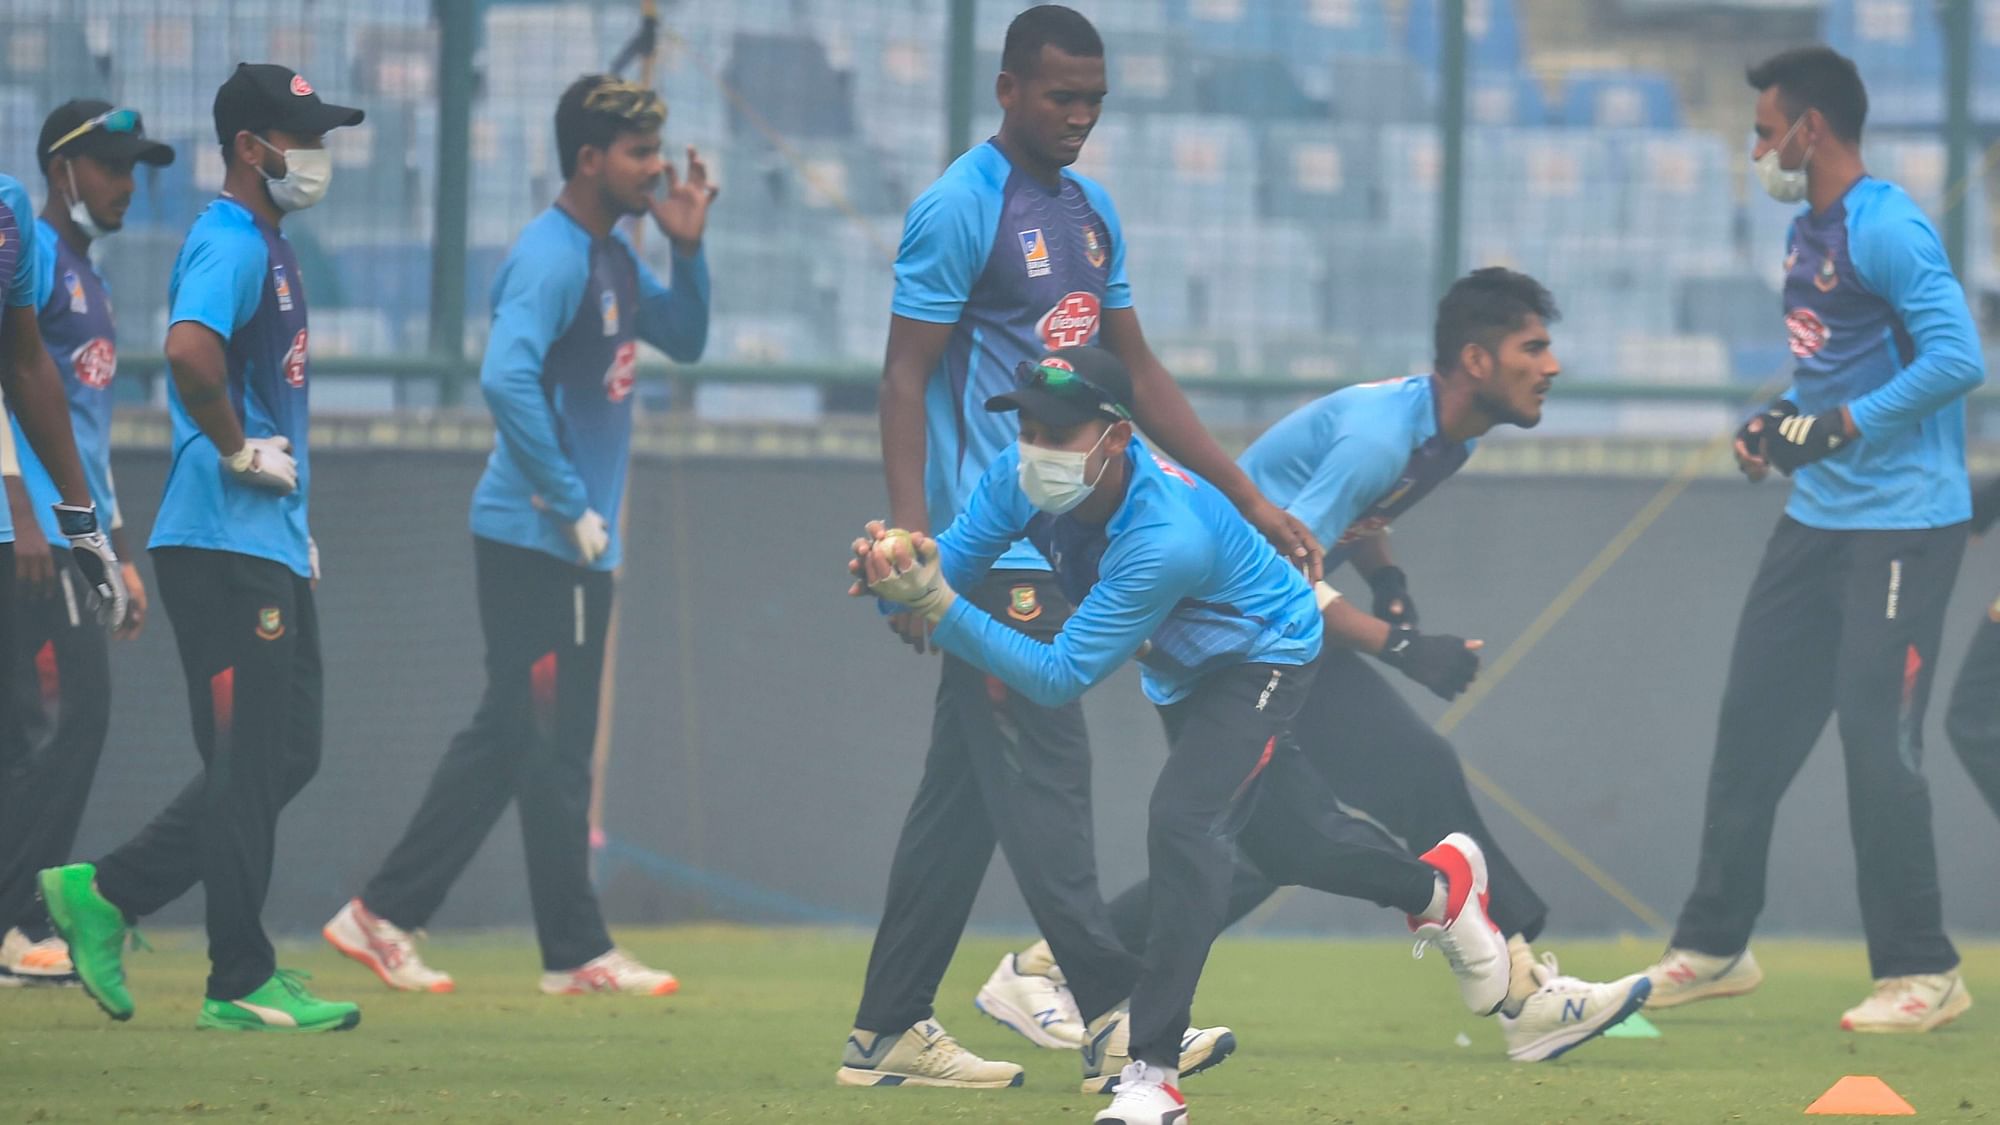 Bangladesh players practising ahead of their first game against India on Sunday, 3 November.